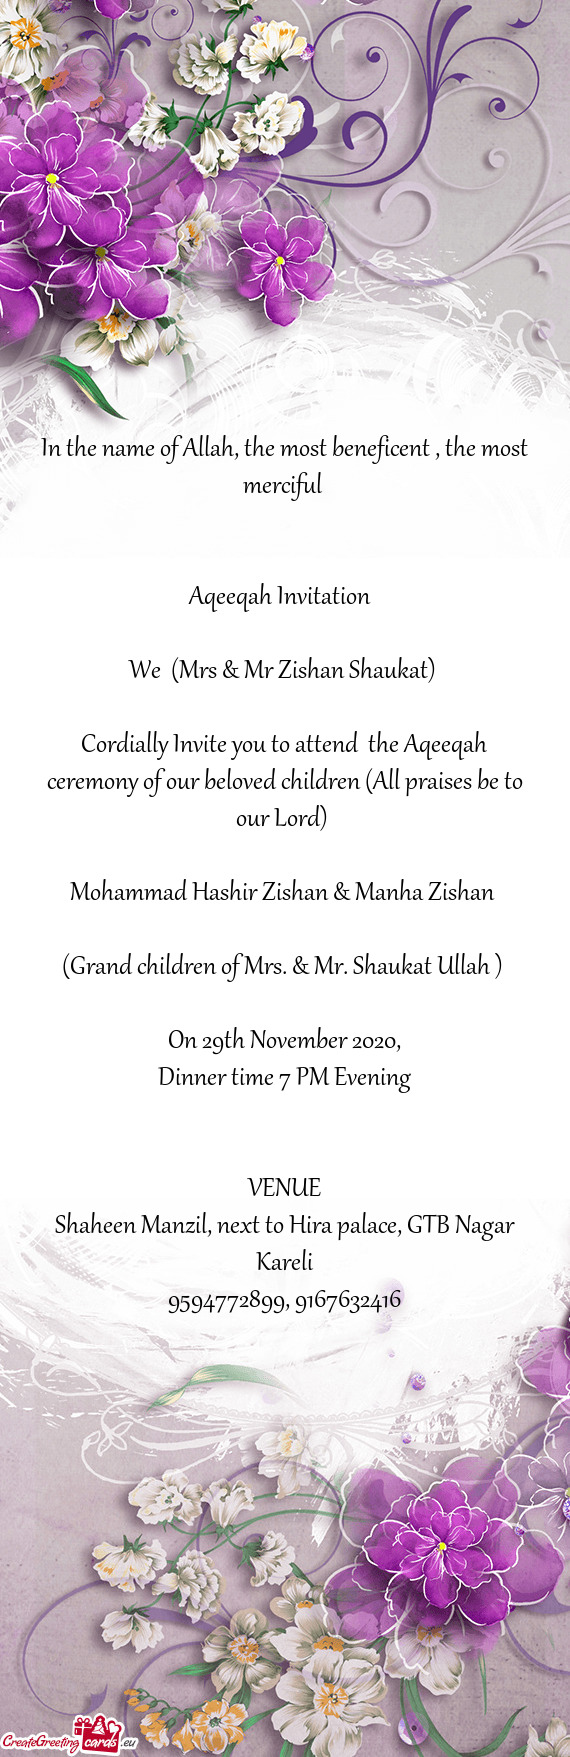 Cordially Invite you to attend the Aqeeqah ceremony of our beloved children (All praises be to our